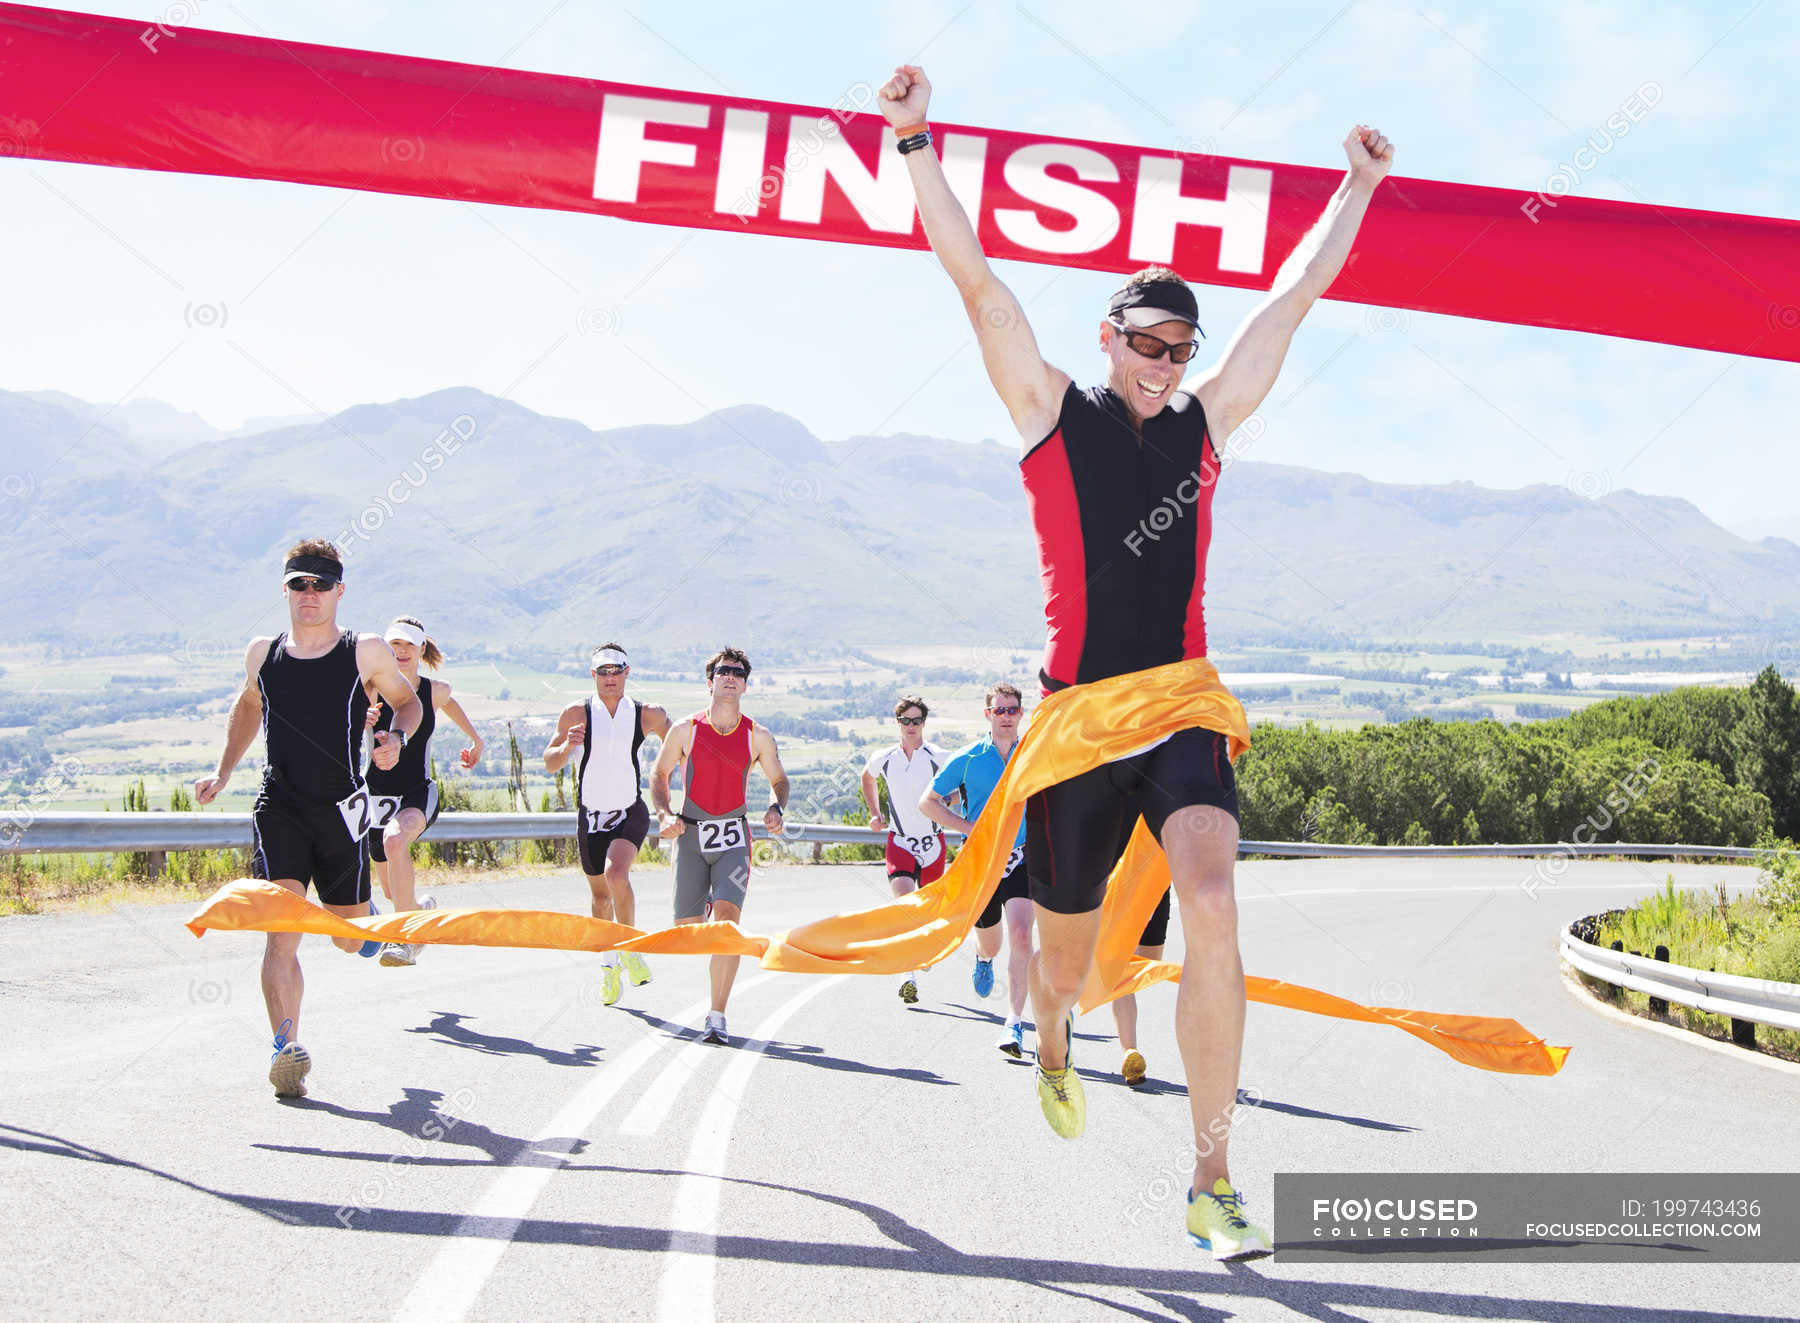 runner-crossing-race-finish-line-people-success-stock-photo